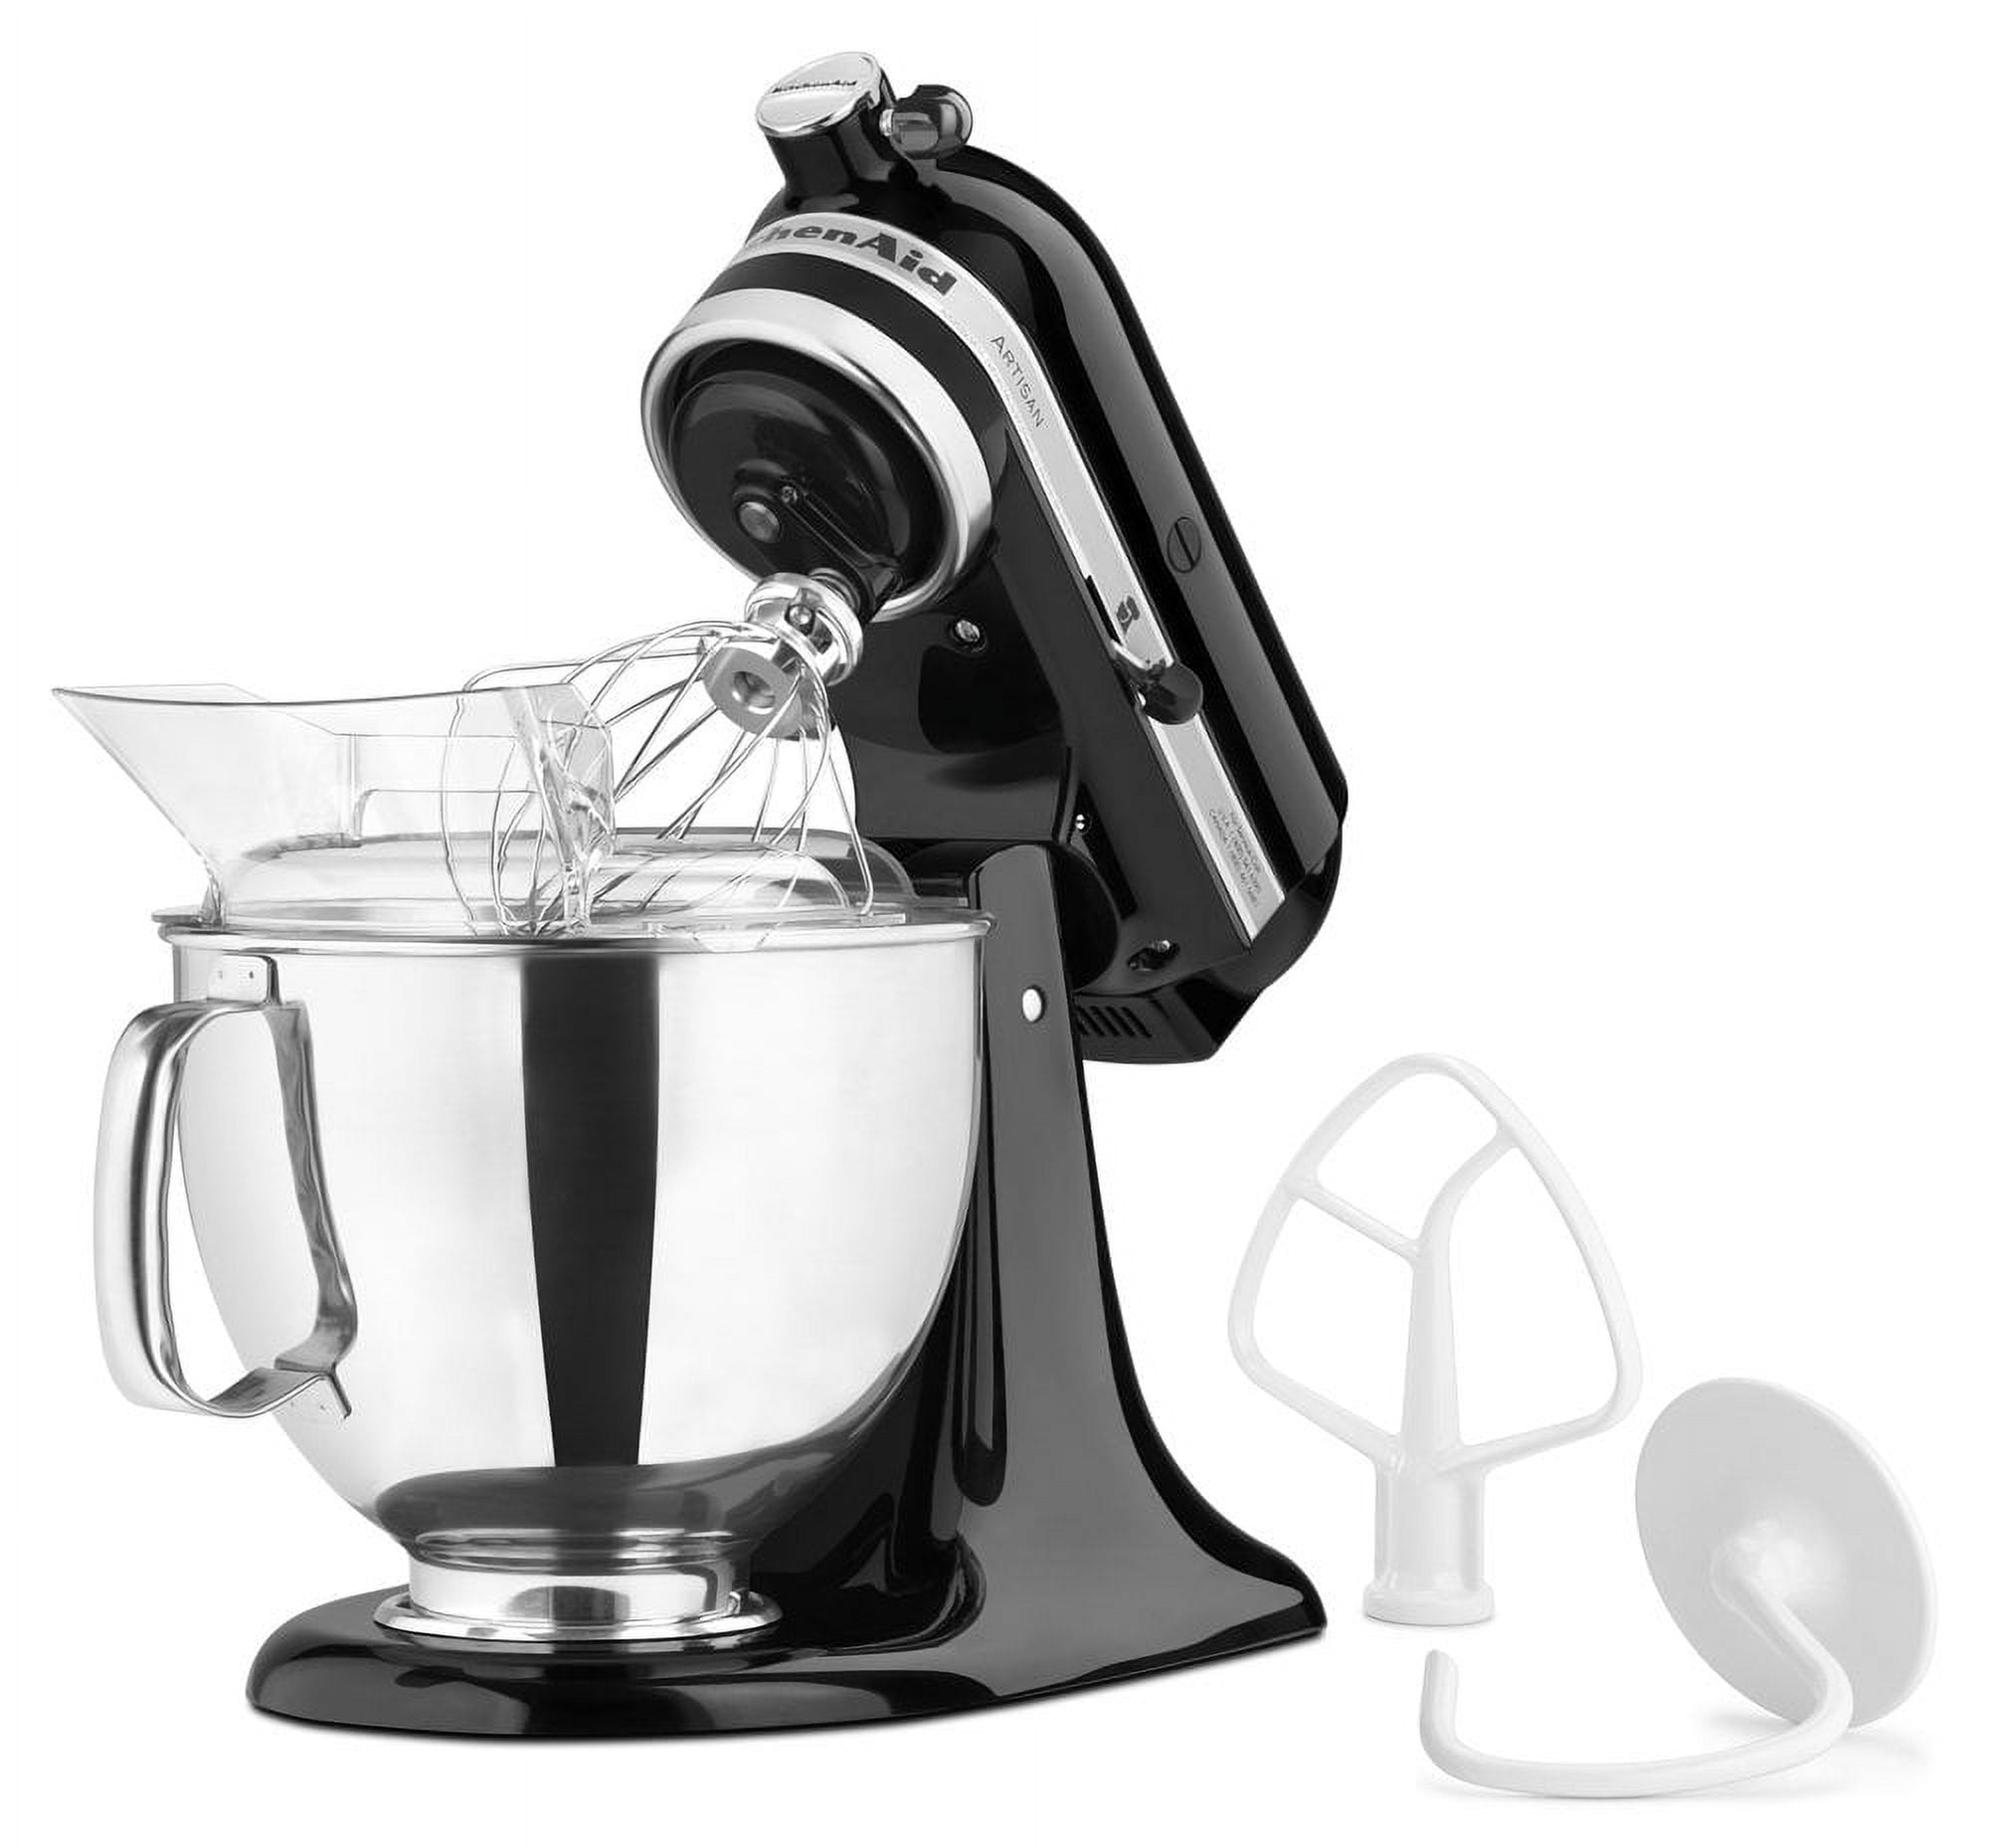  KitchenAid Artisan Series 5-Qt. Stand Mixer with Pouring Shield  - Watermelon: Electric Stand Mixers: Home & Kitchen